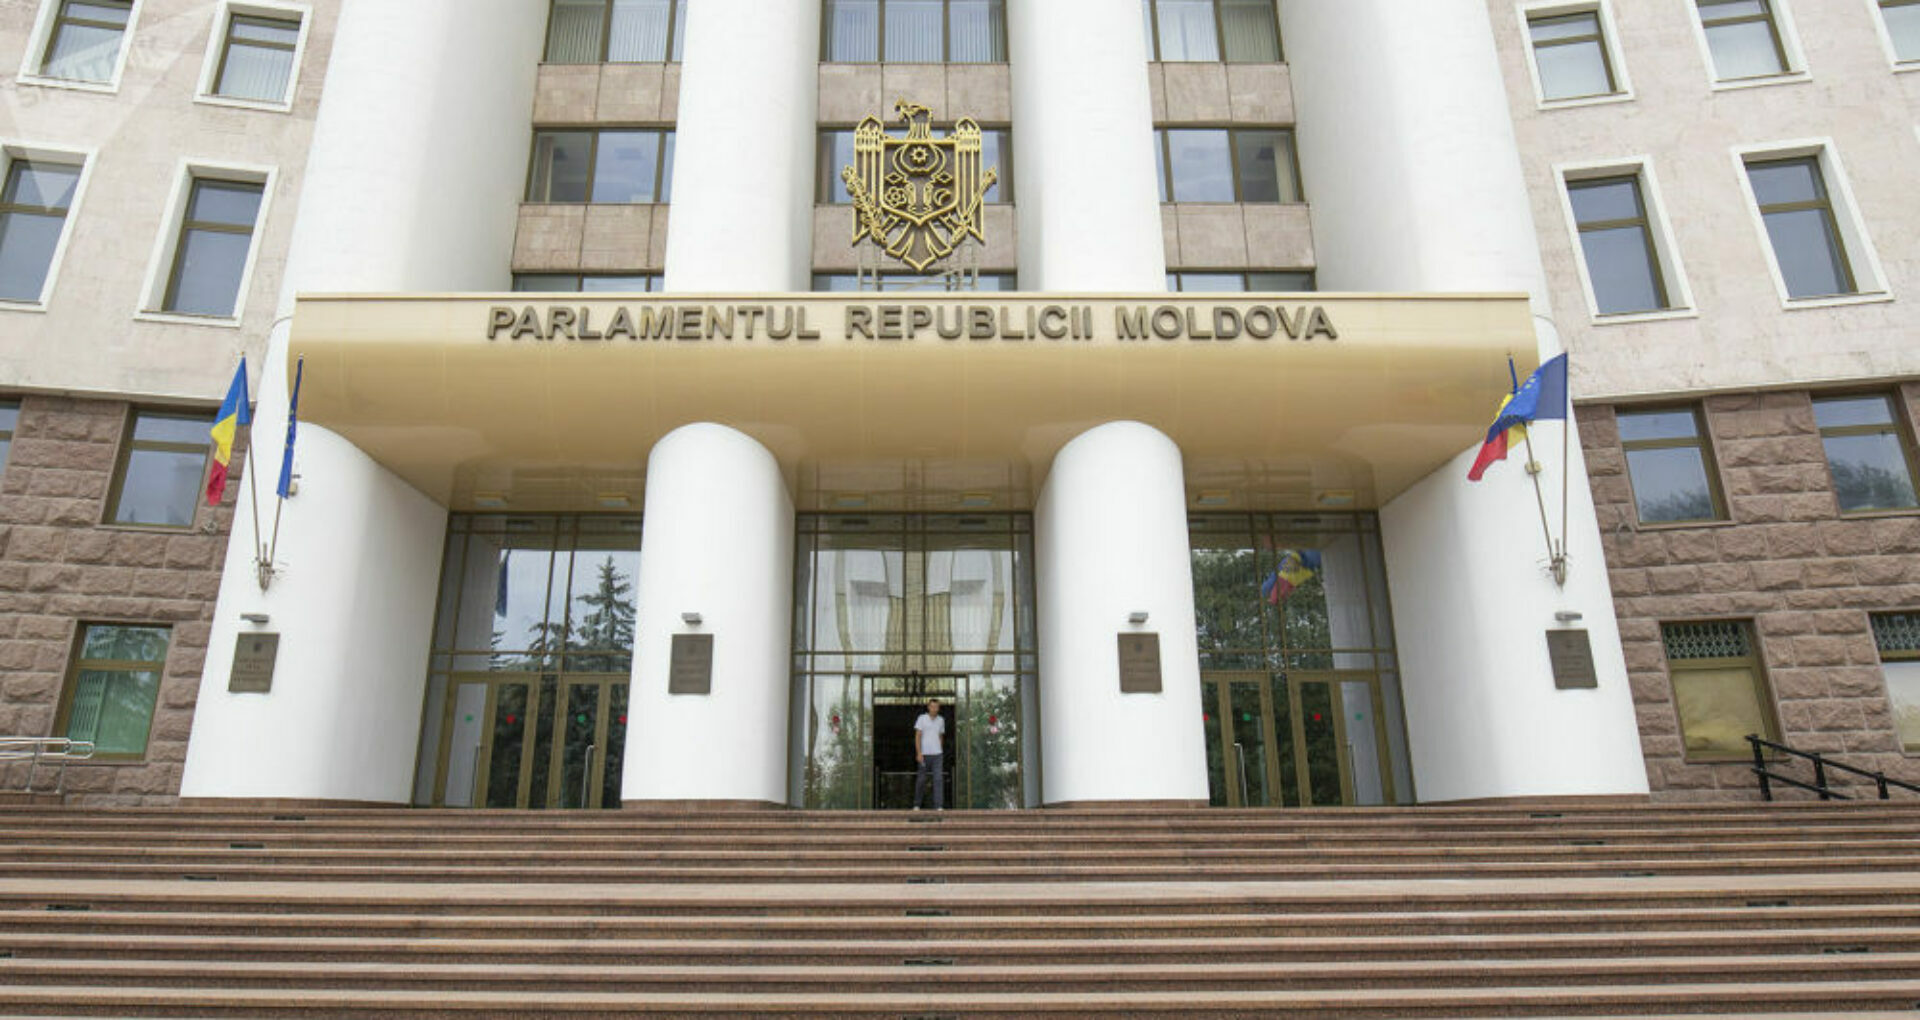 In the Next Two Weeks, the Moldovan Parliament will Receive Delegations from Several Parliamentary Committees from Abroad